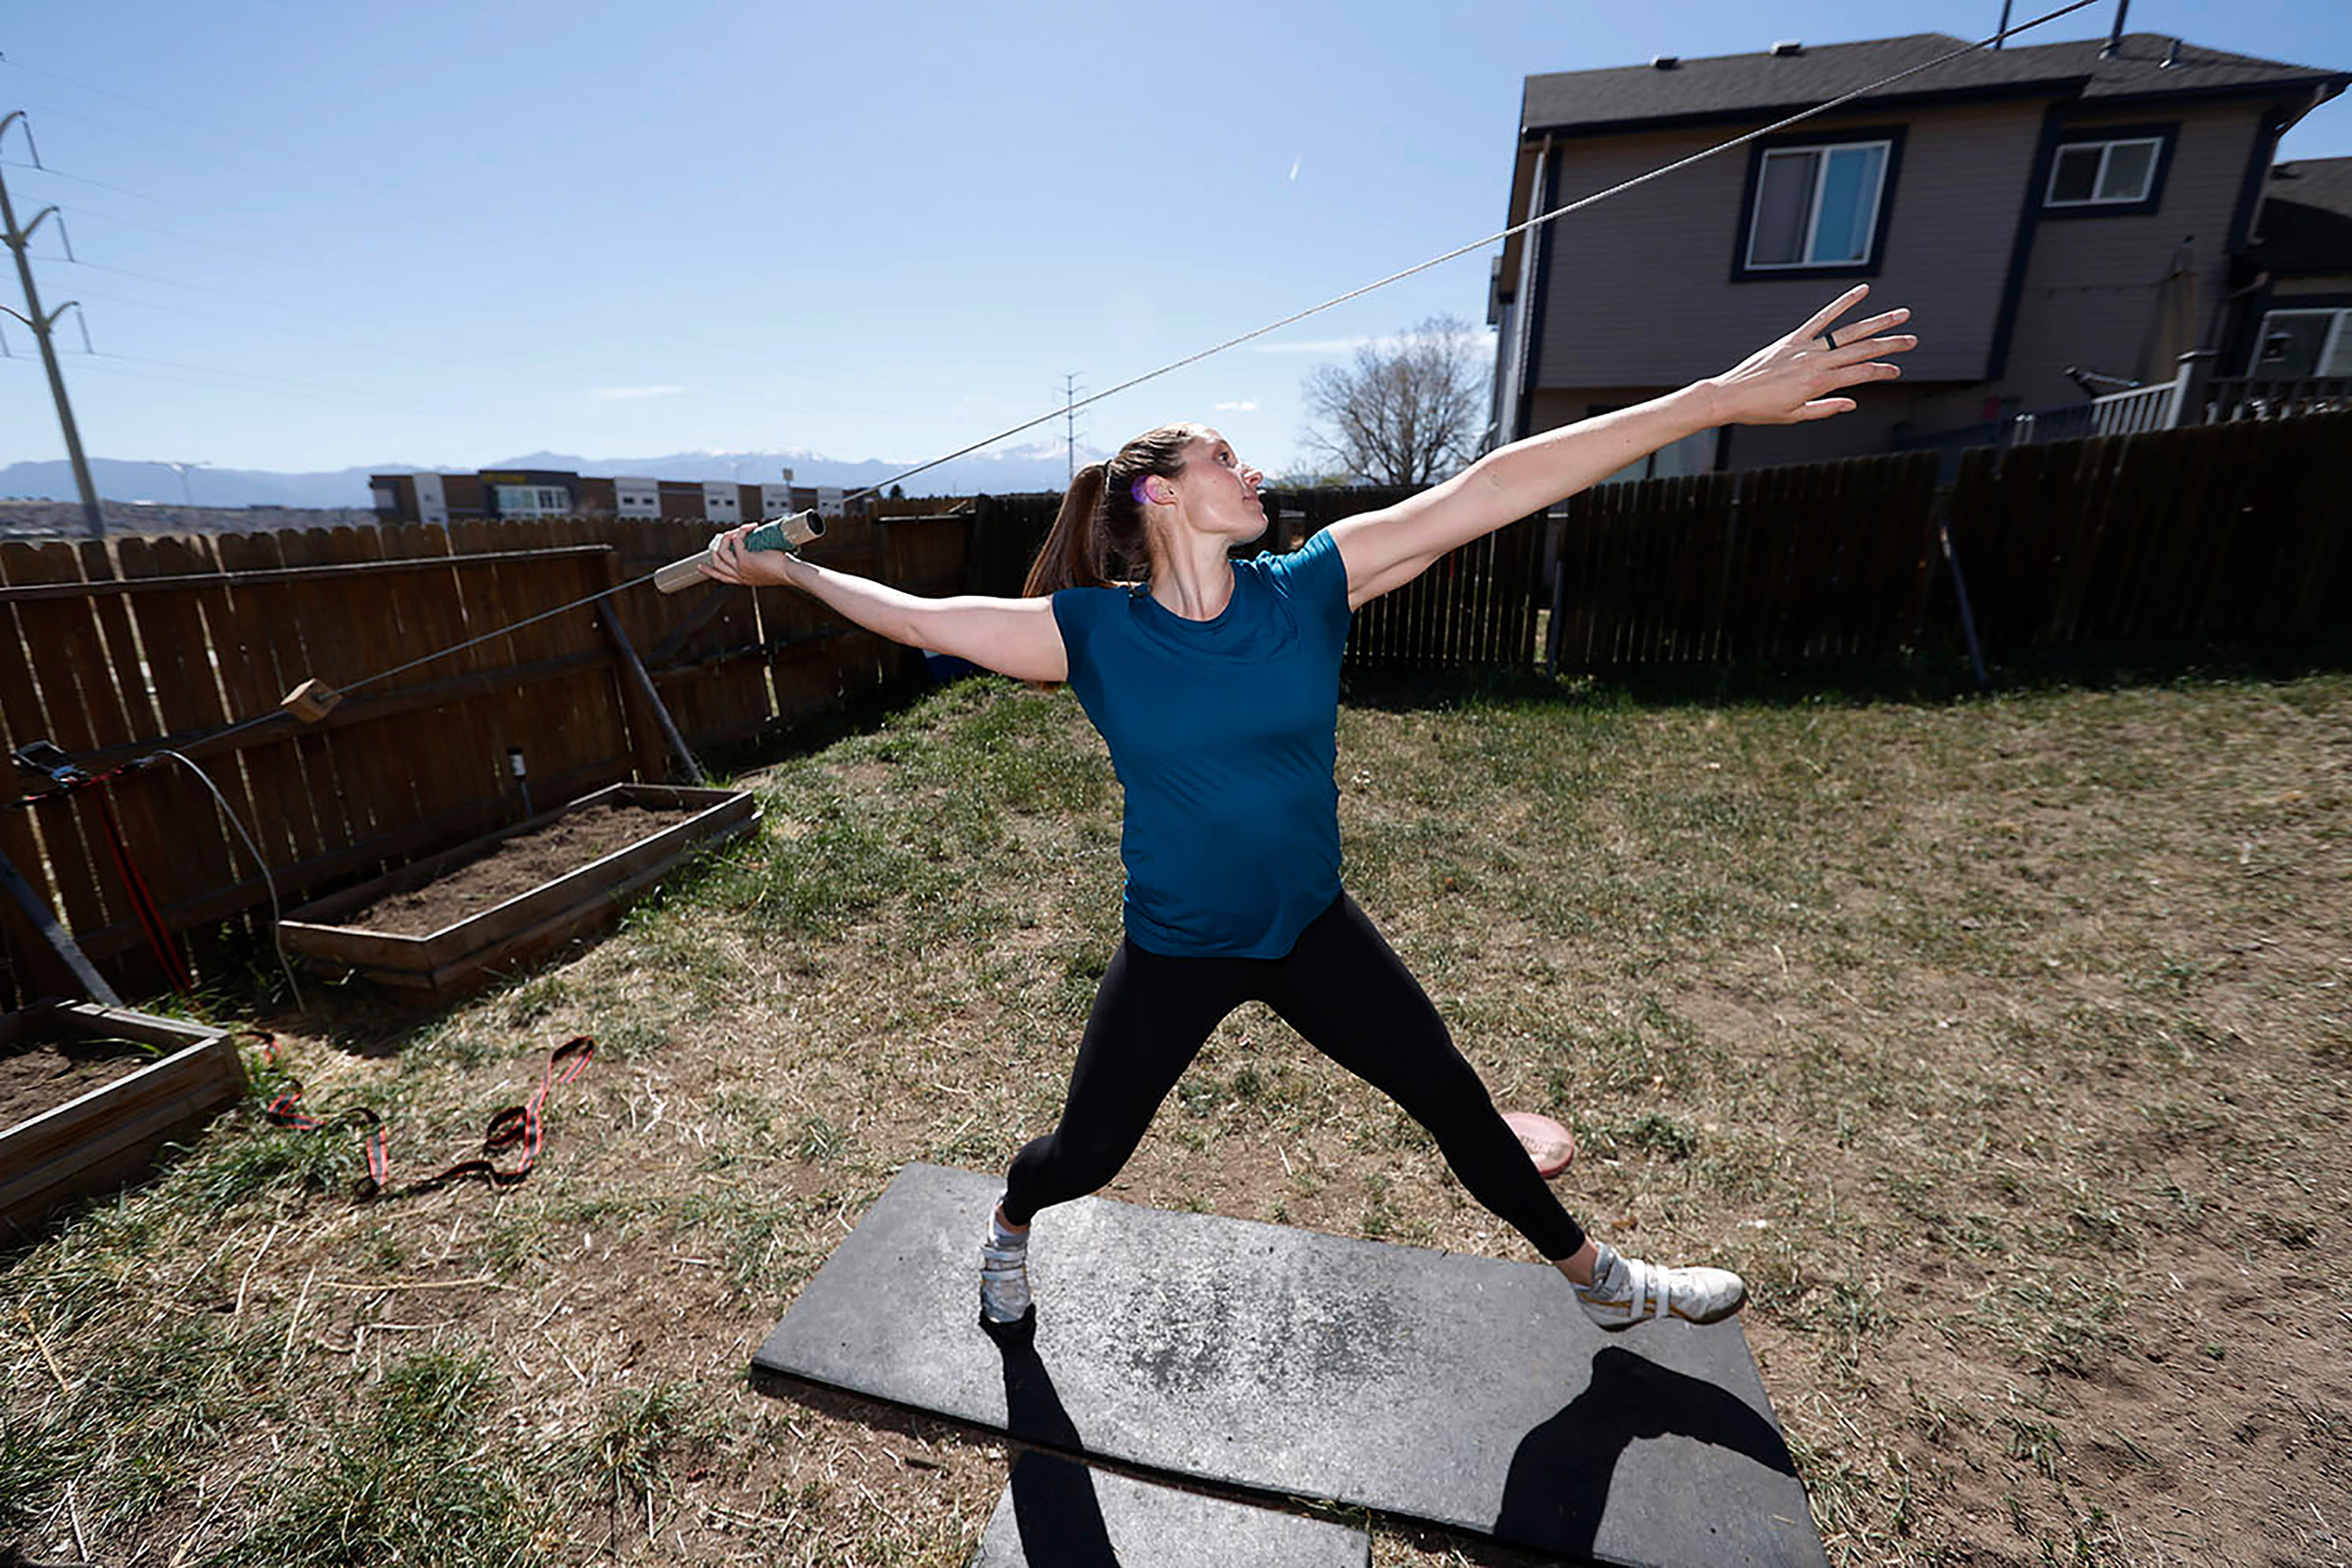 Winger uses a cable system to simulate throwing a javelin as she trains outside her home in Colorado Springs in April (David Zalubowski—AP)